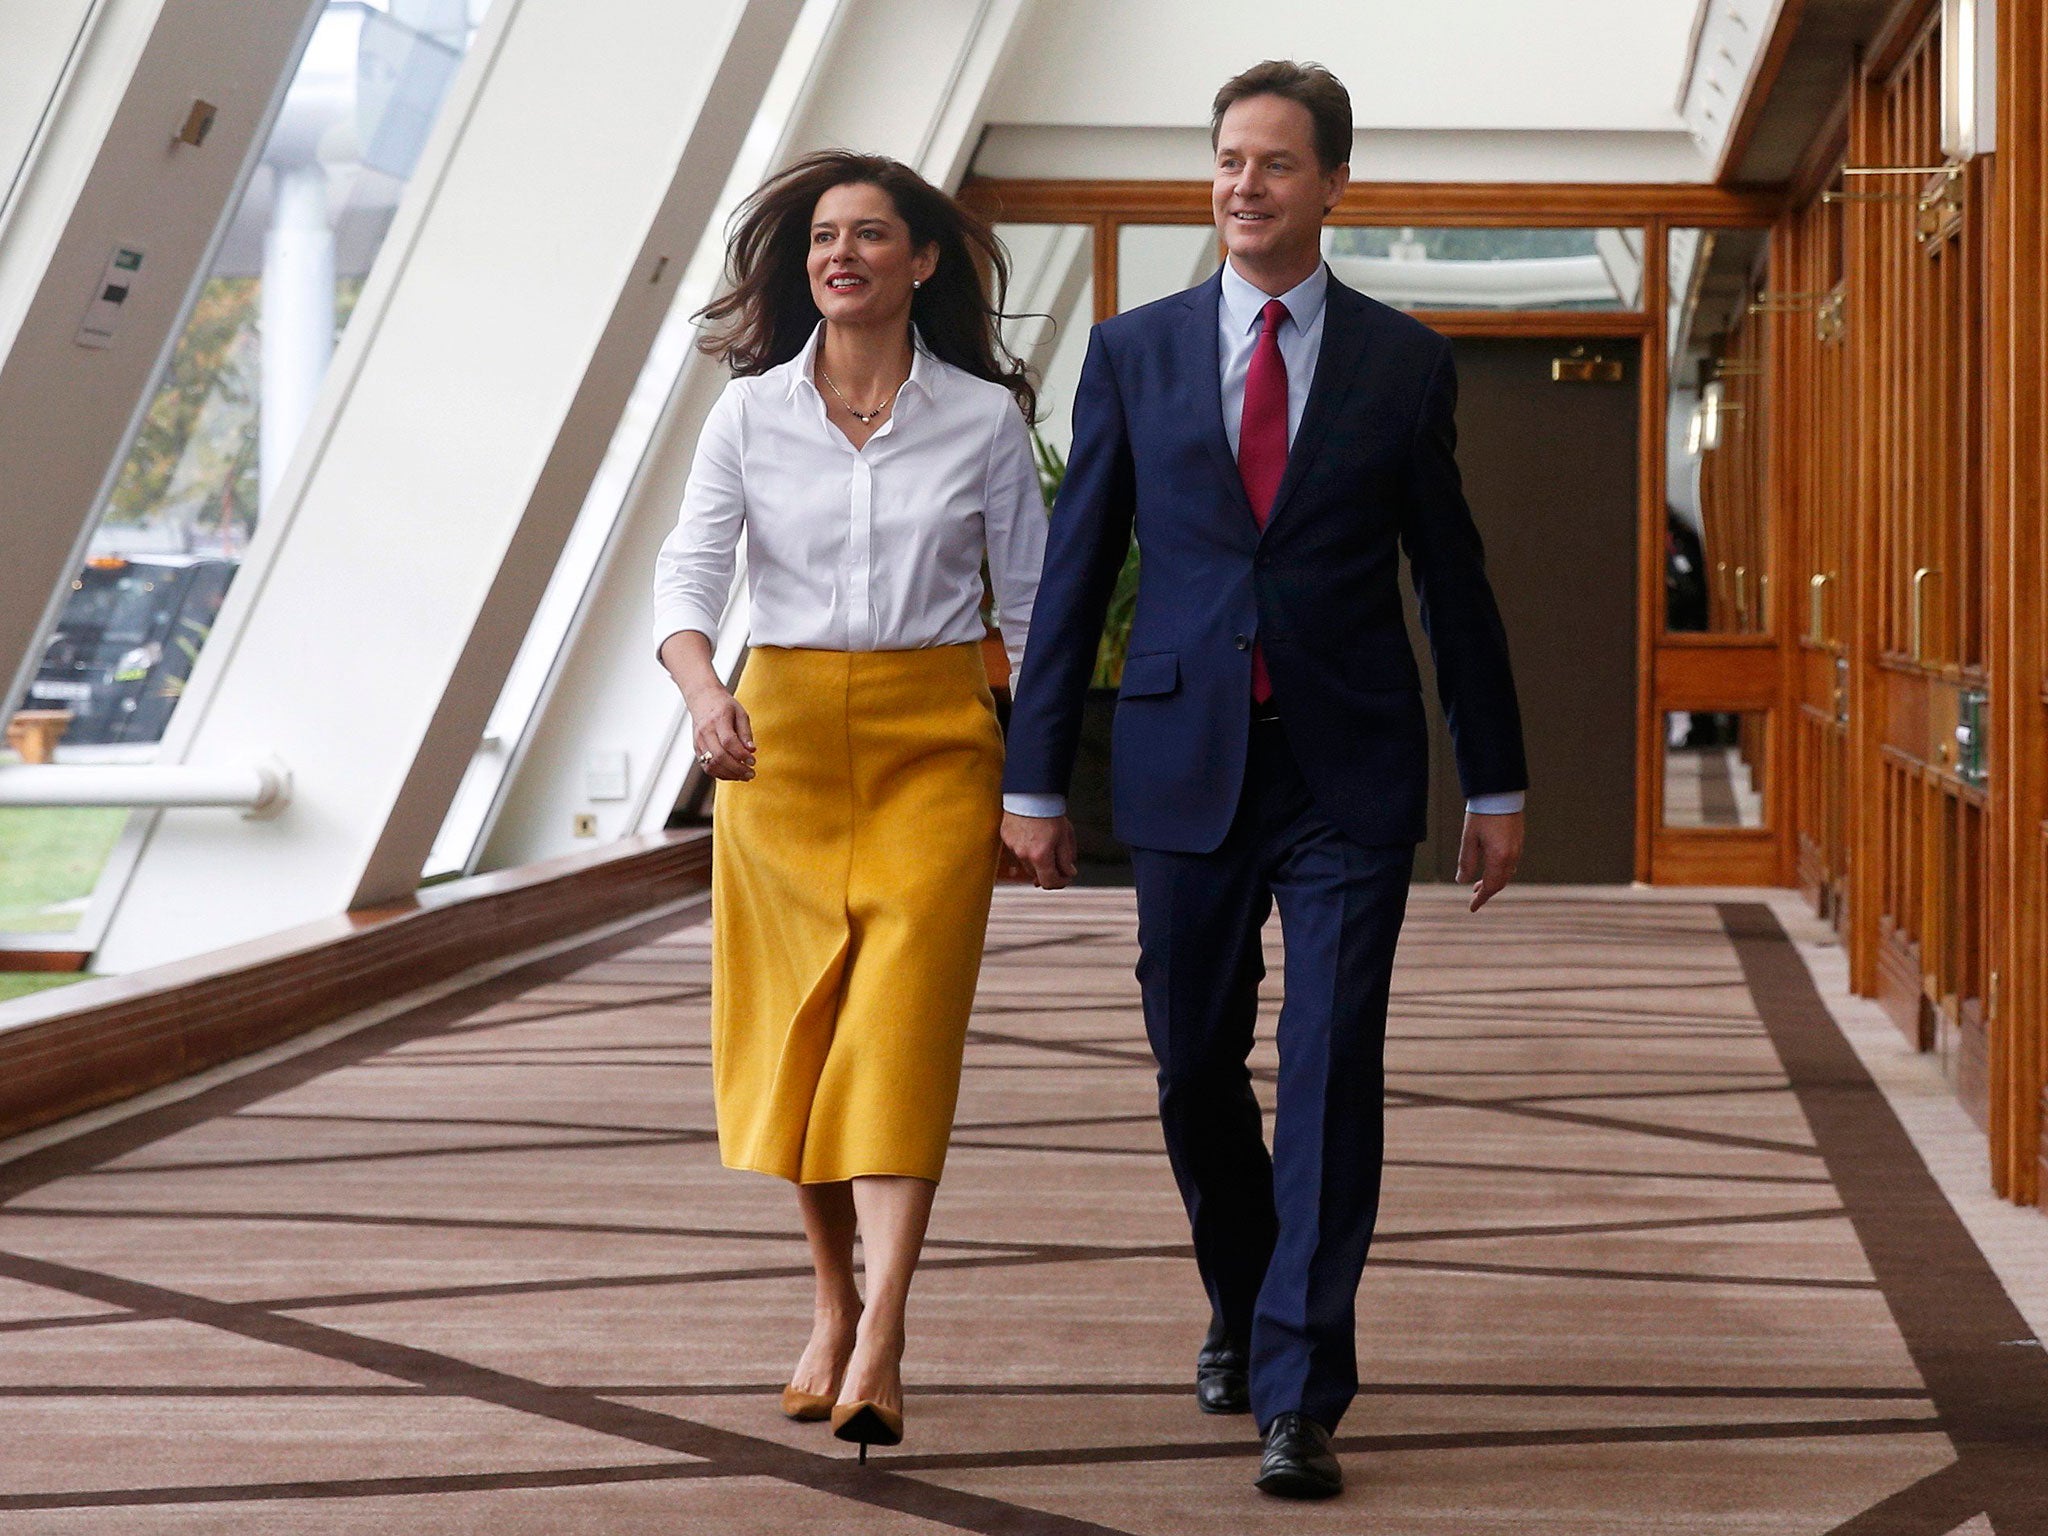 Nick Clegg, with his wife Miriam Gonzalez Durantez, on his way to deliver the keynote speech at the party's autumn conference in Glasgow